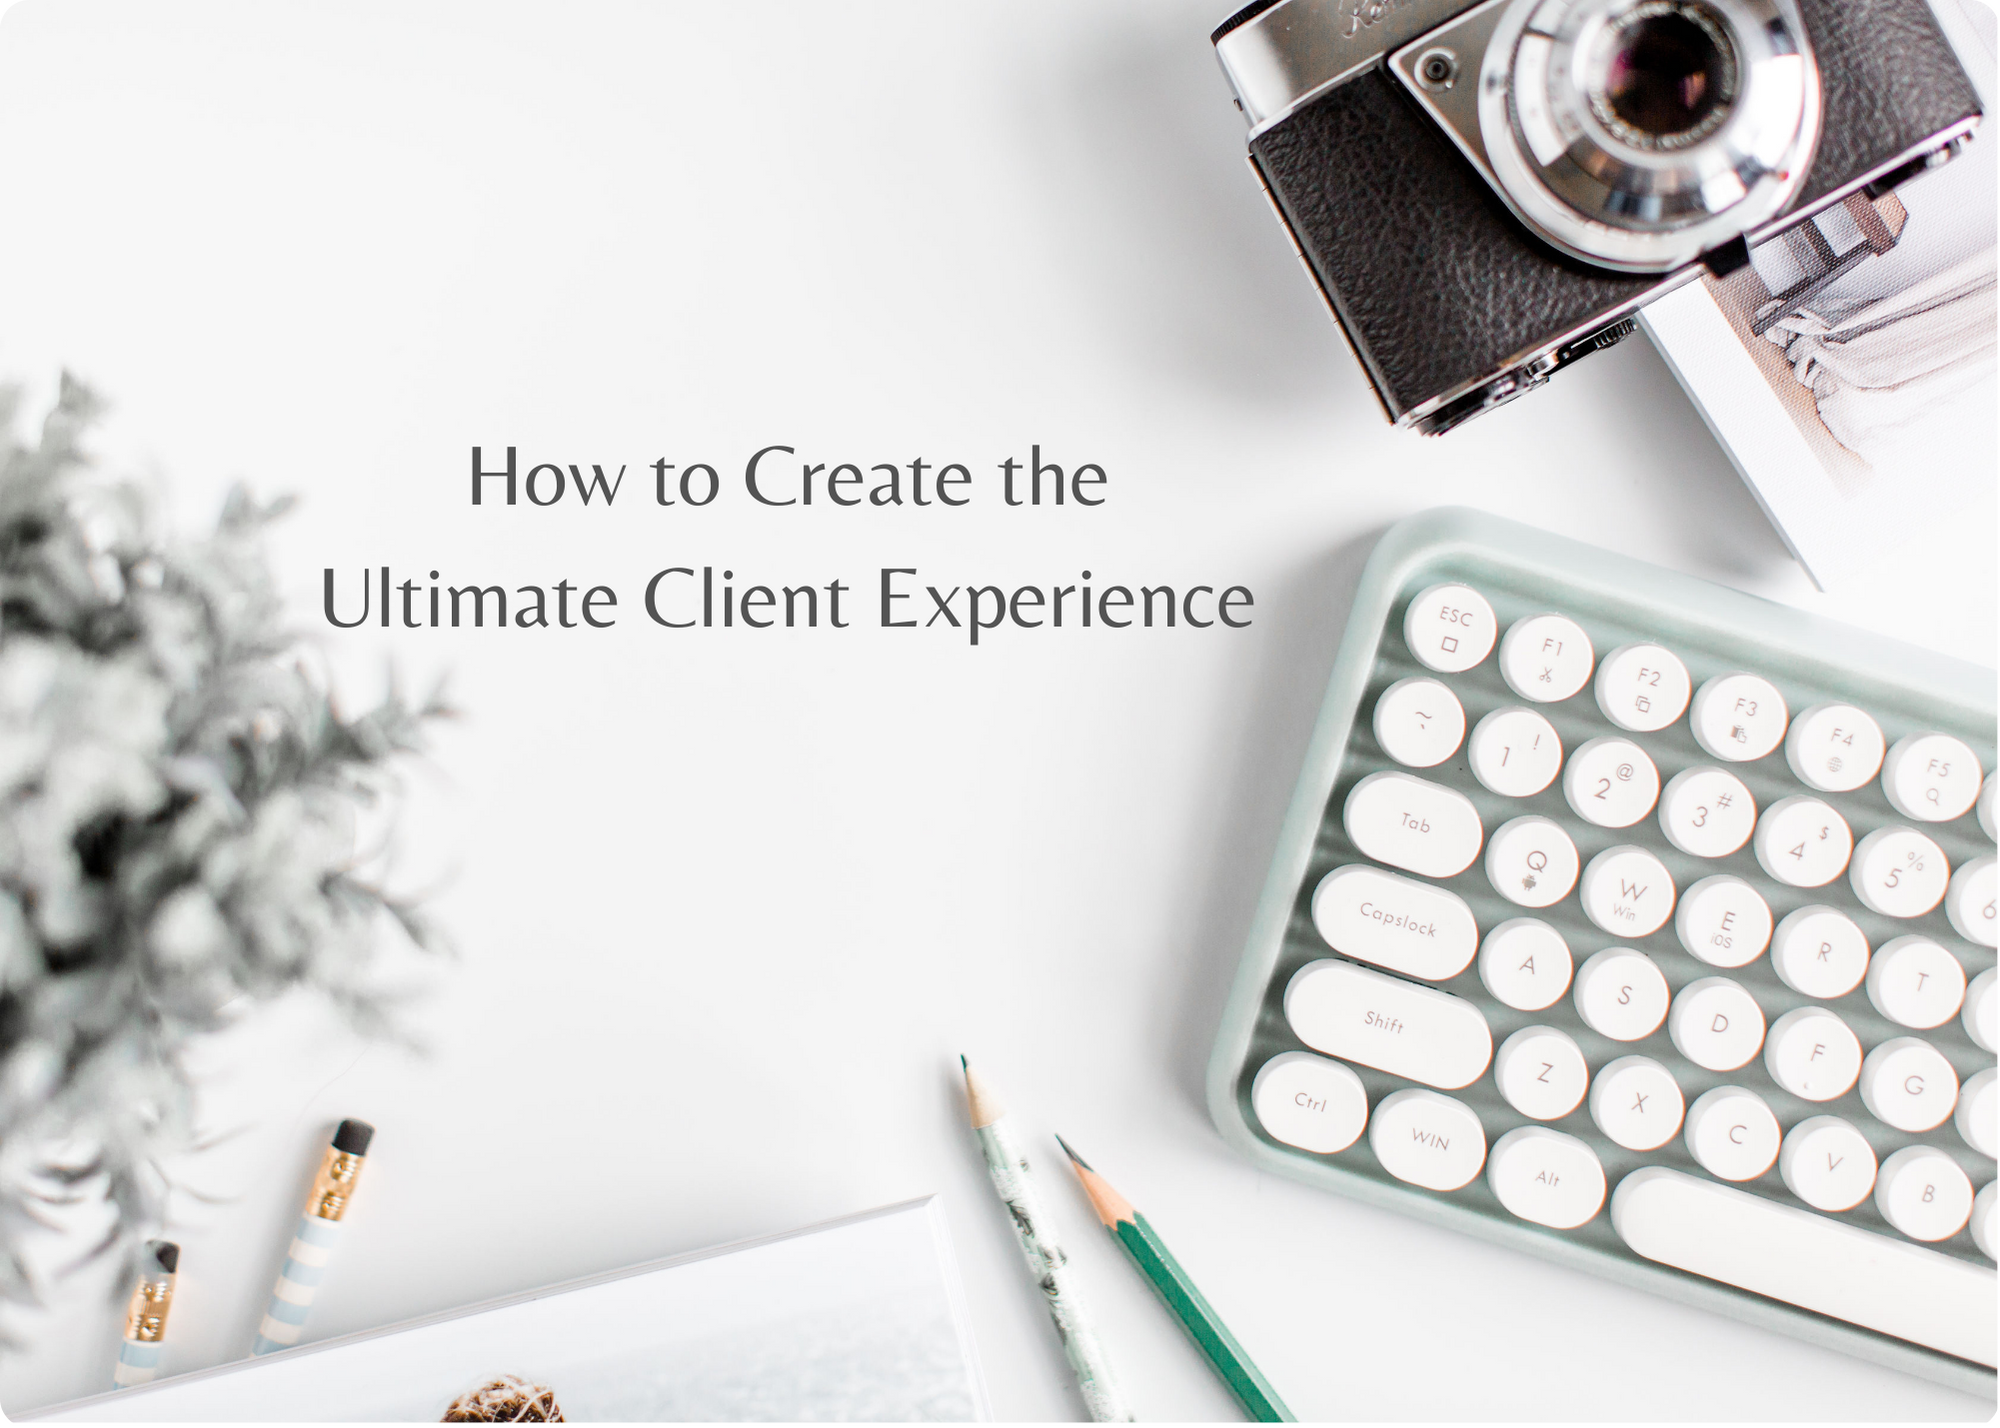 The thing that is going to set you apart from your competition is YOU and the unique client experience you offer your clients.